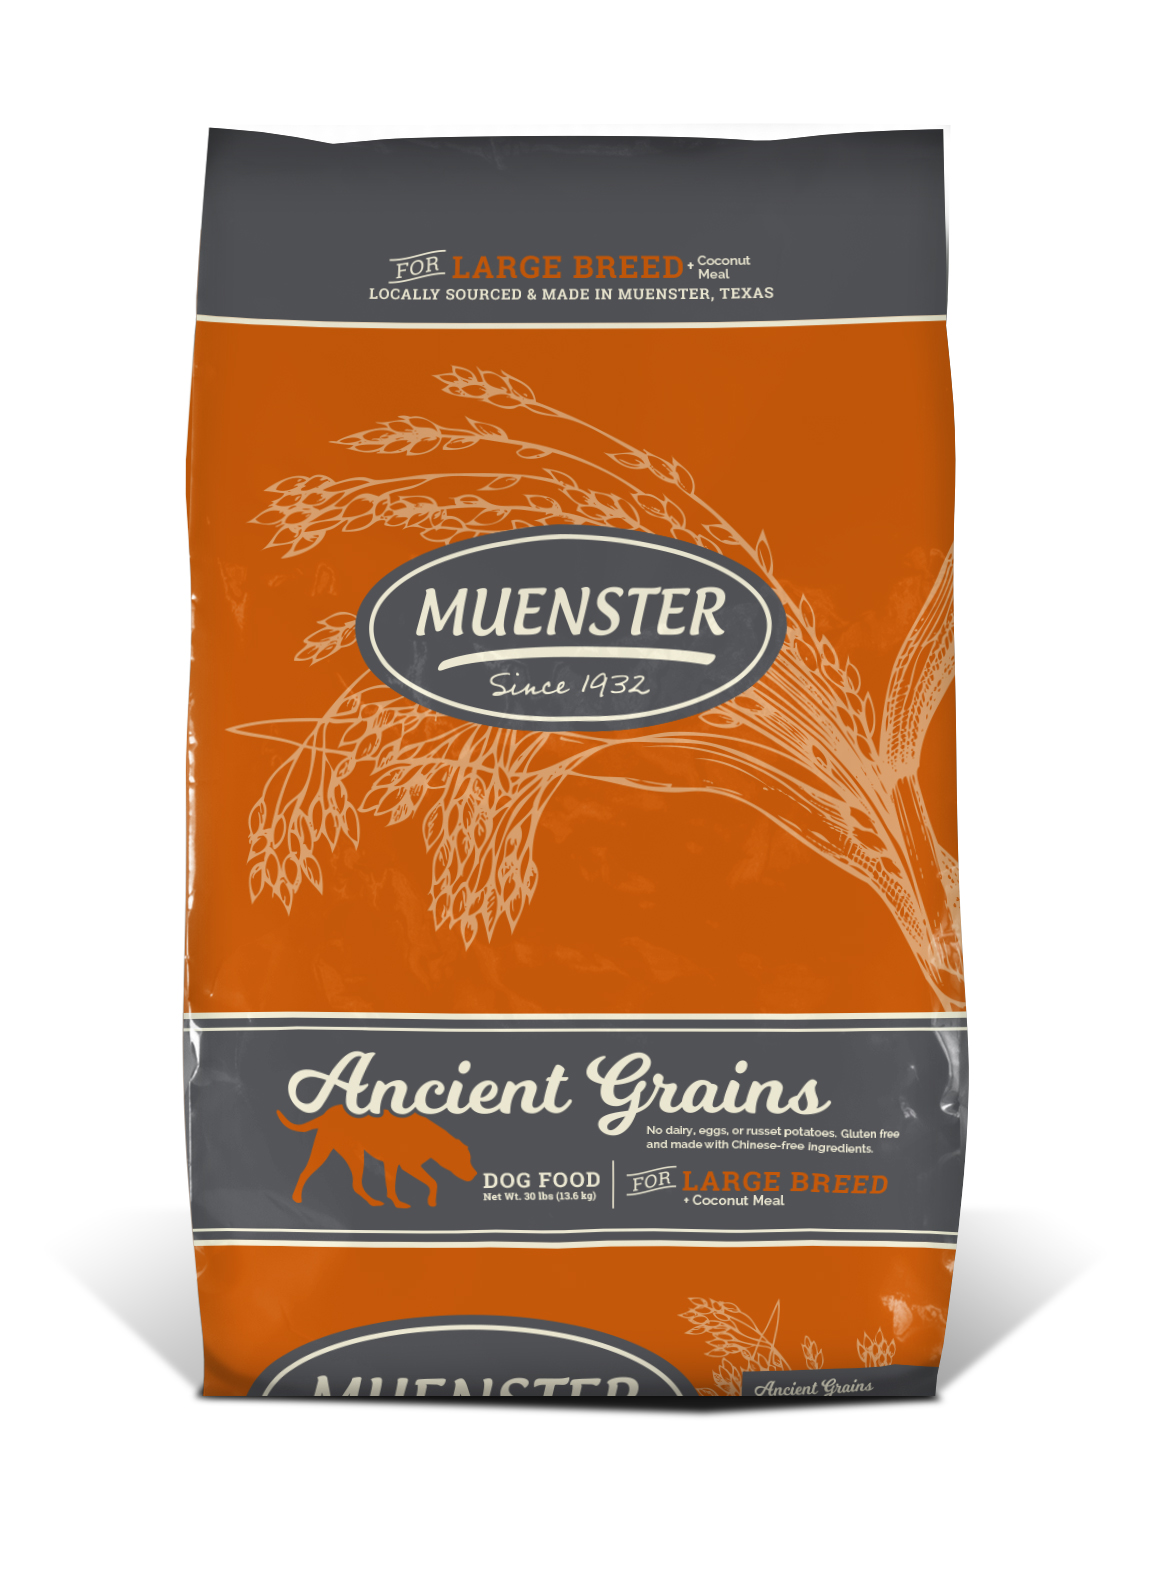 Muenster Ancient Grains for Large Breed Dog Food, 22 lbs